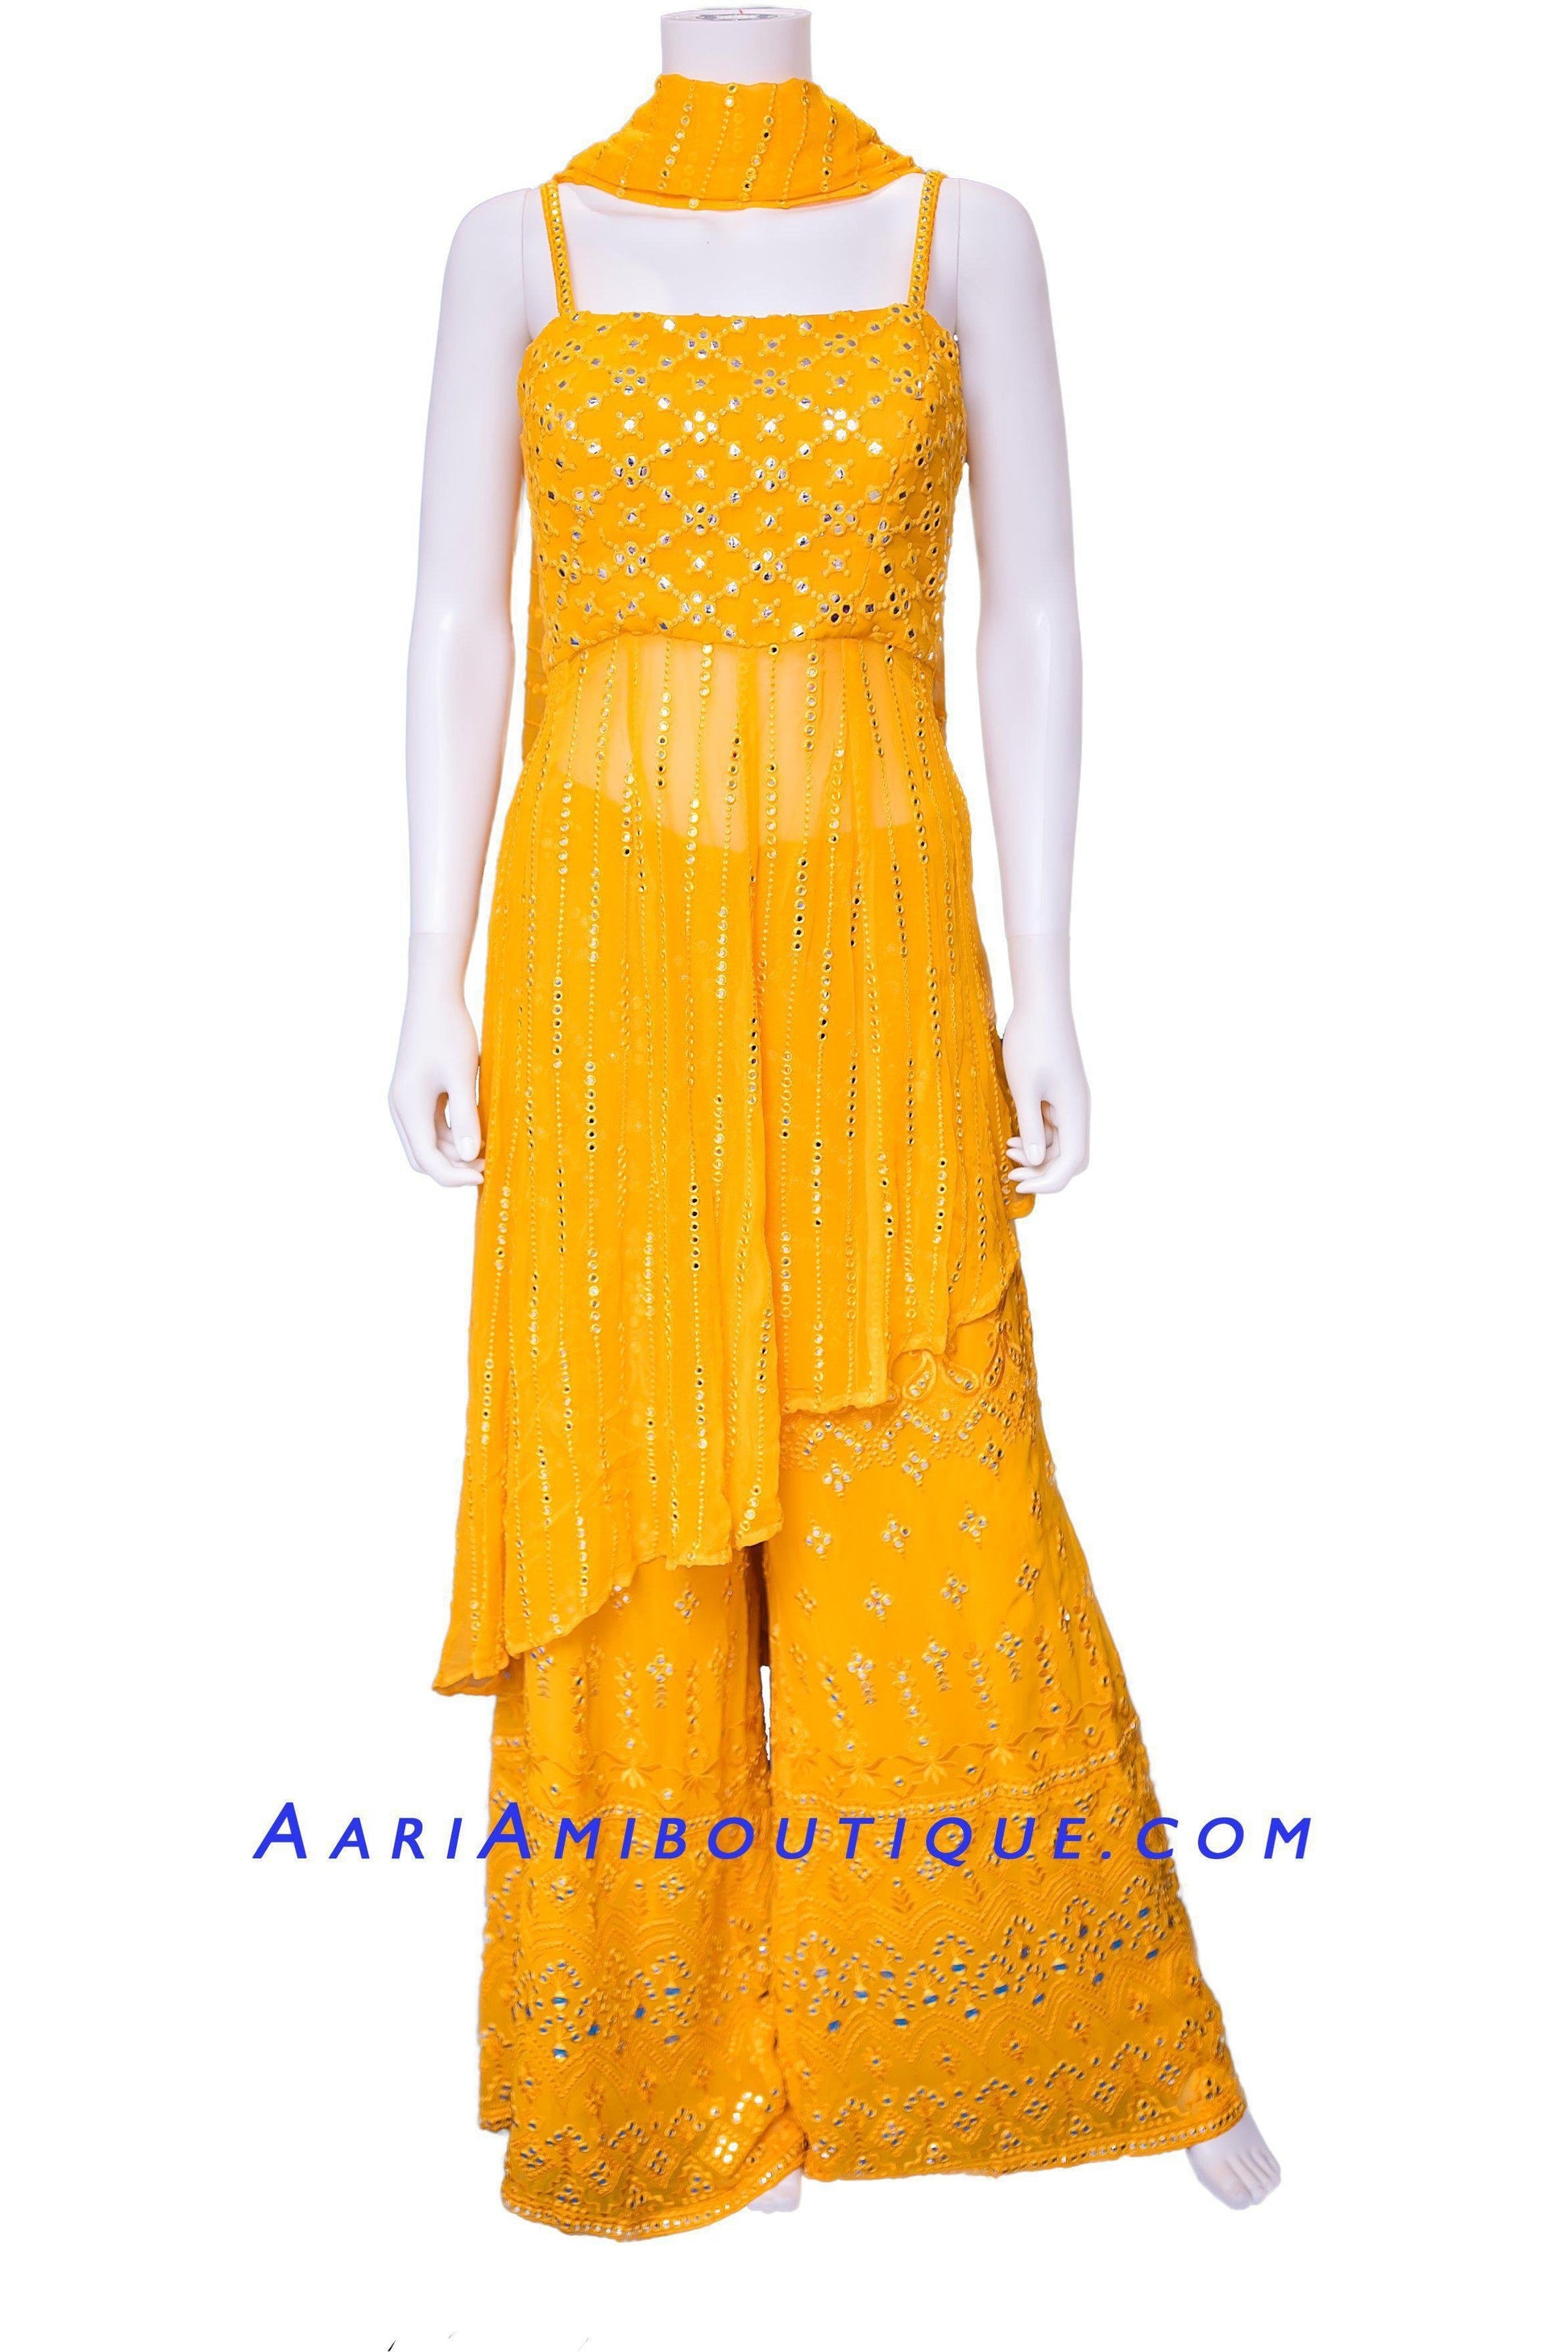 Blooming Marigold High-Low Palazzo Set-AariAmi Boutique